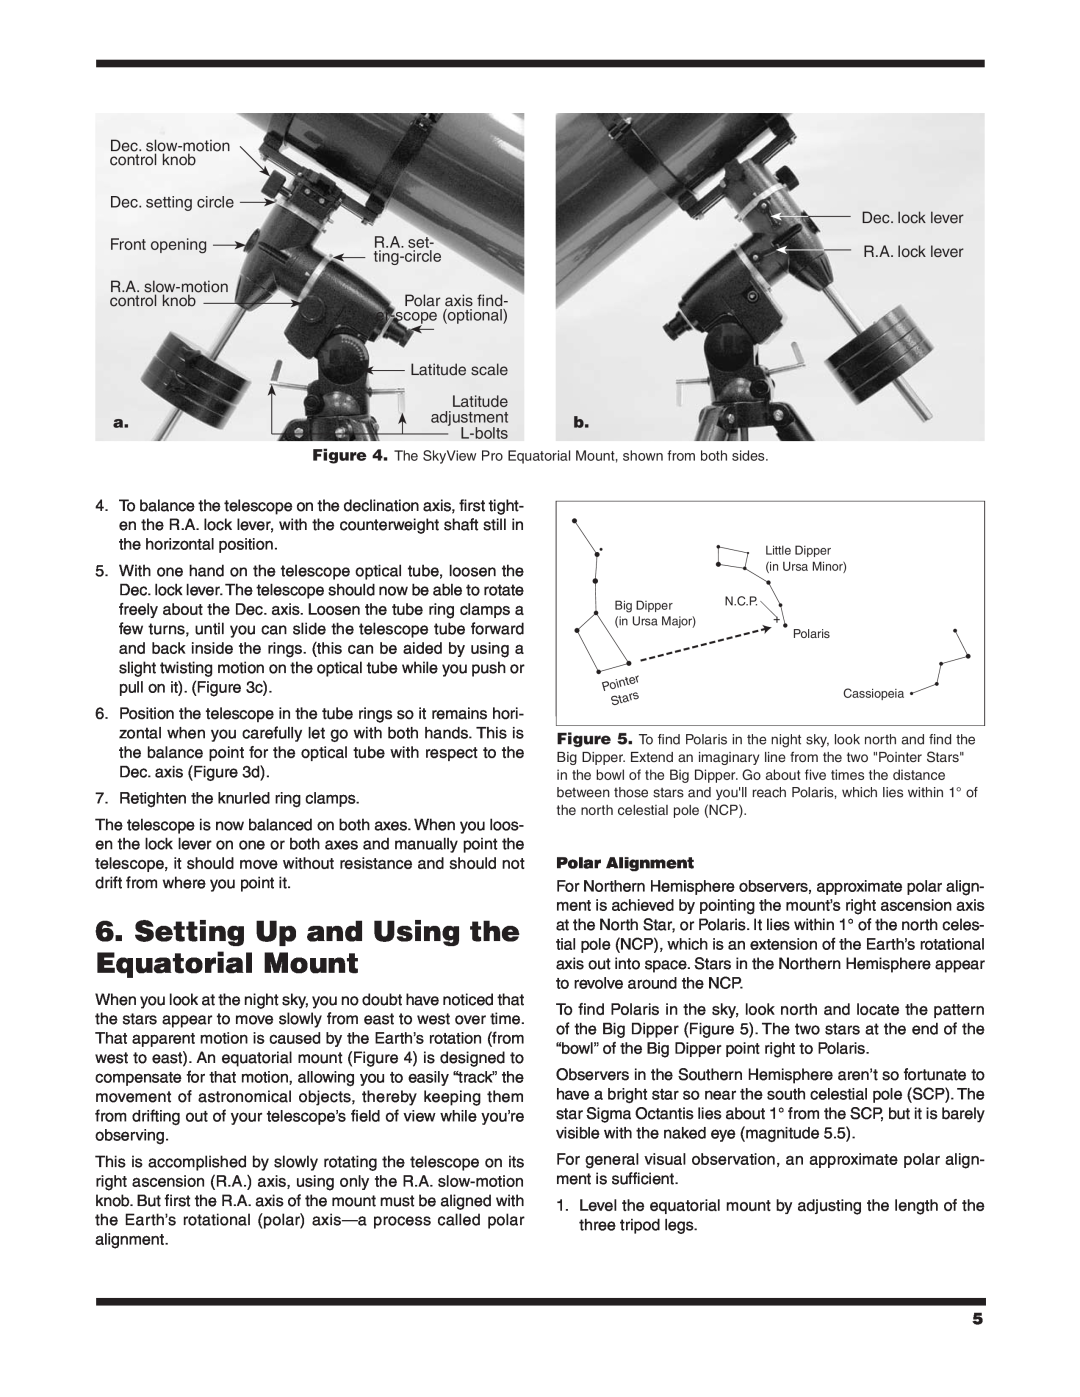 Orion 9829 instruction manual Setting Up and Using the Equatorial Mount, Polar Alignment 